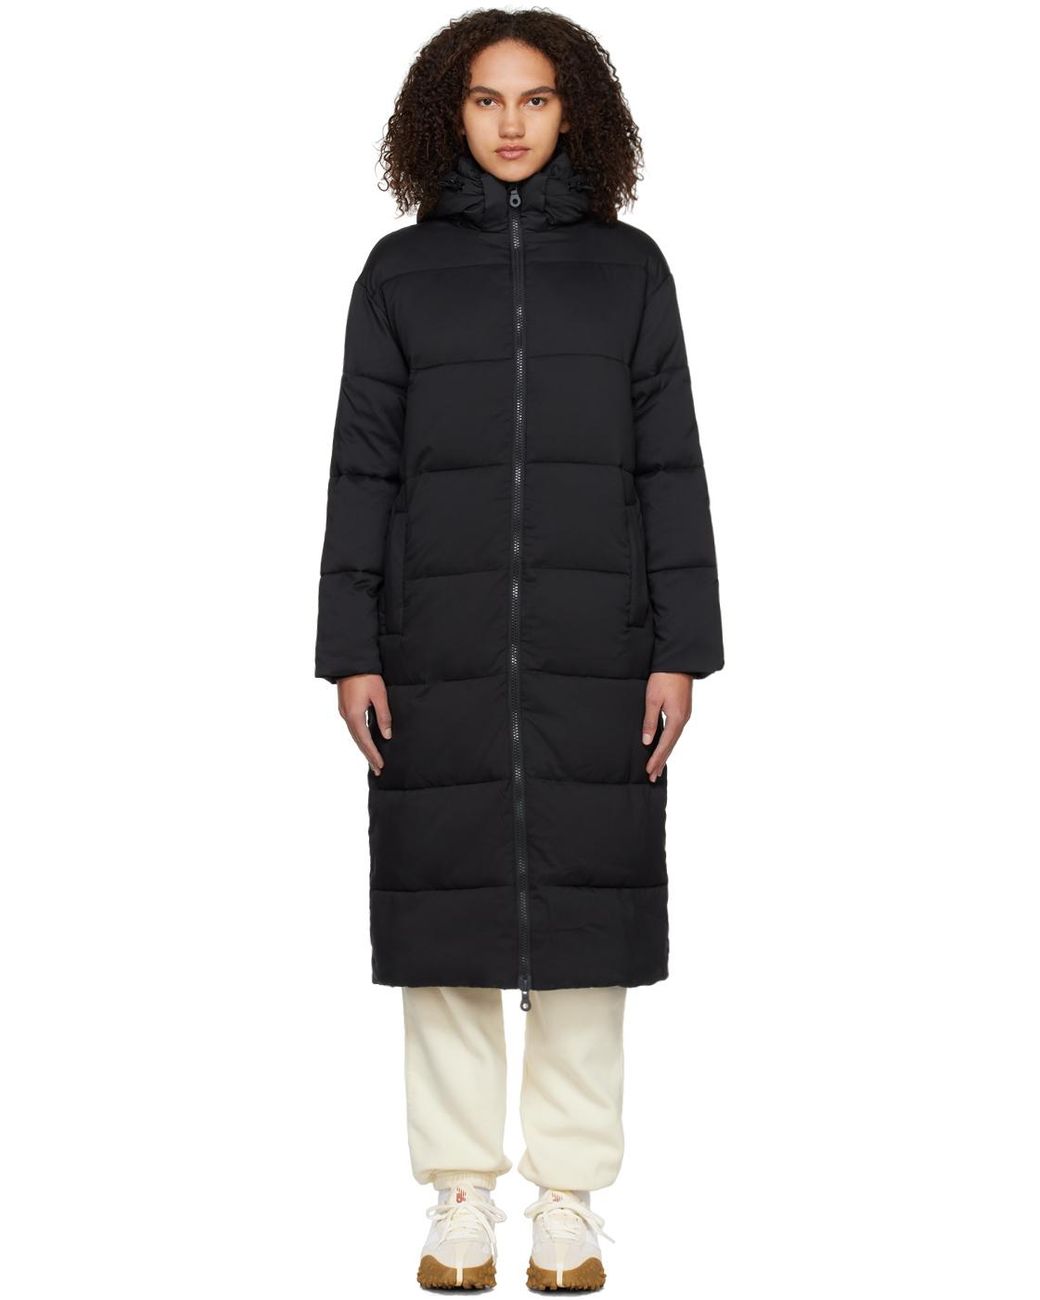 GIRLFRIEND COLLECTIVE Serenity Puffer Coat in Black | Lyst Canada